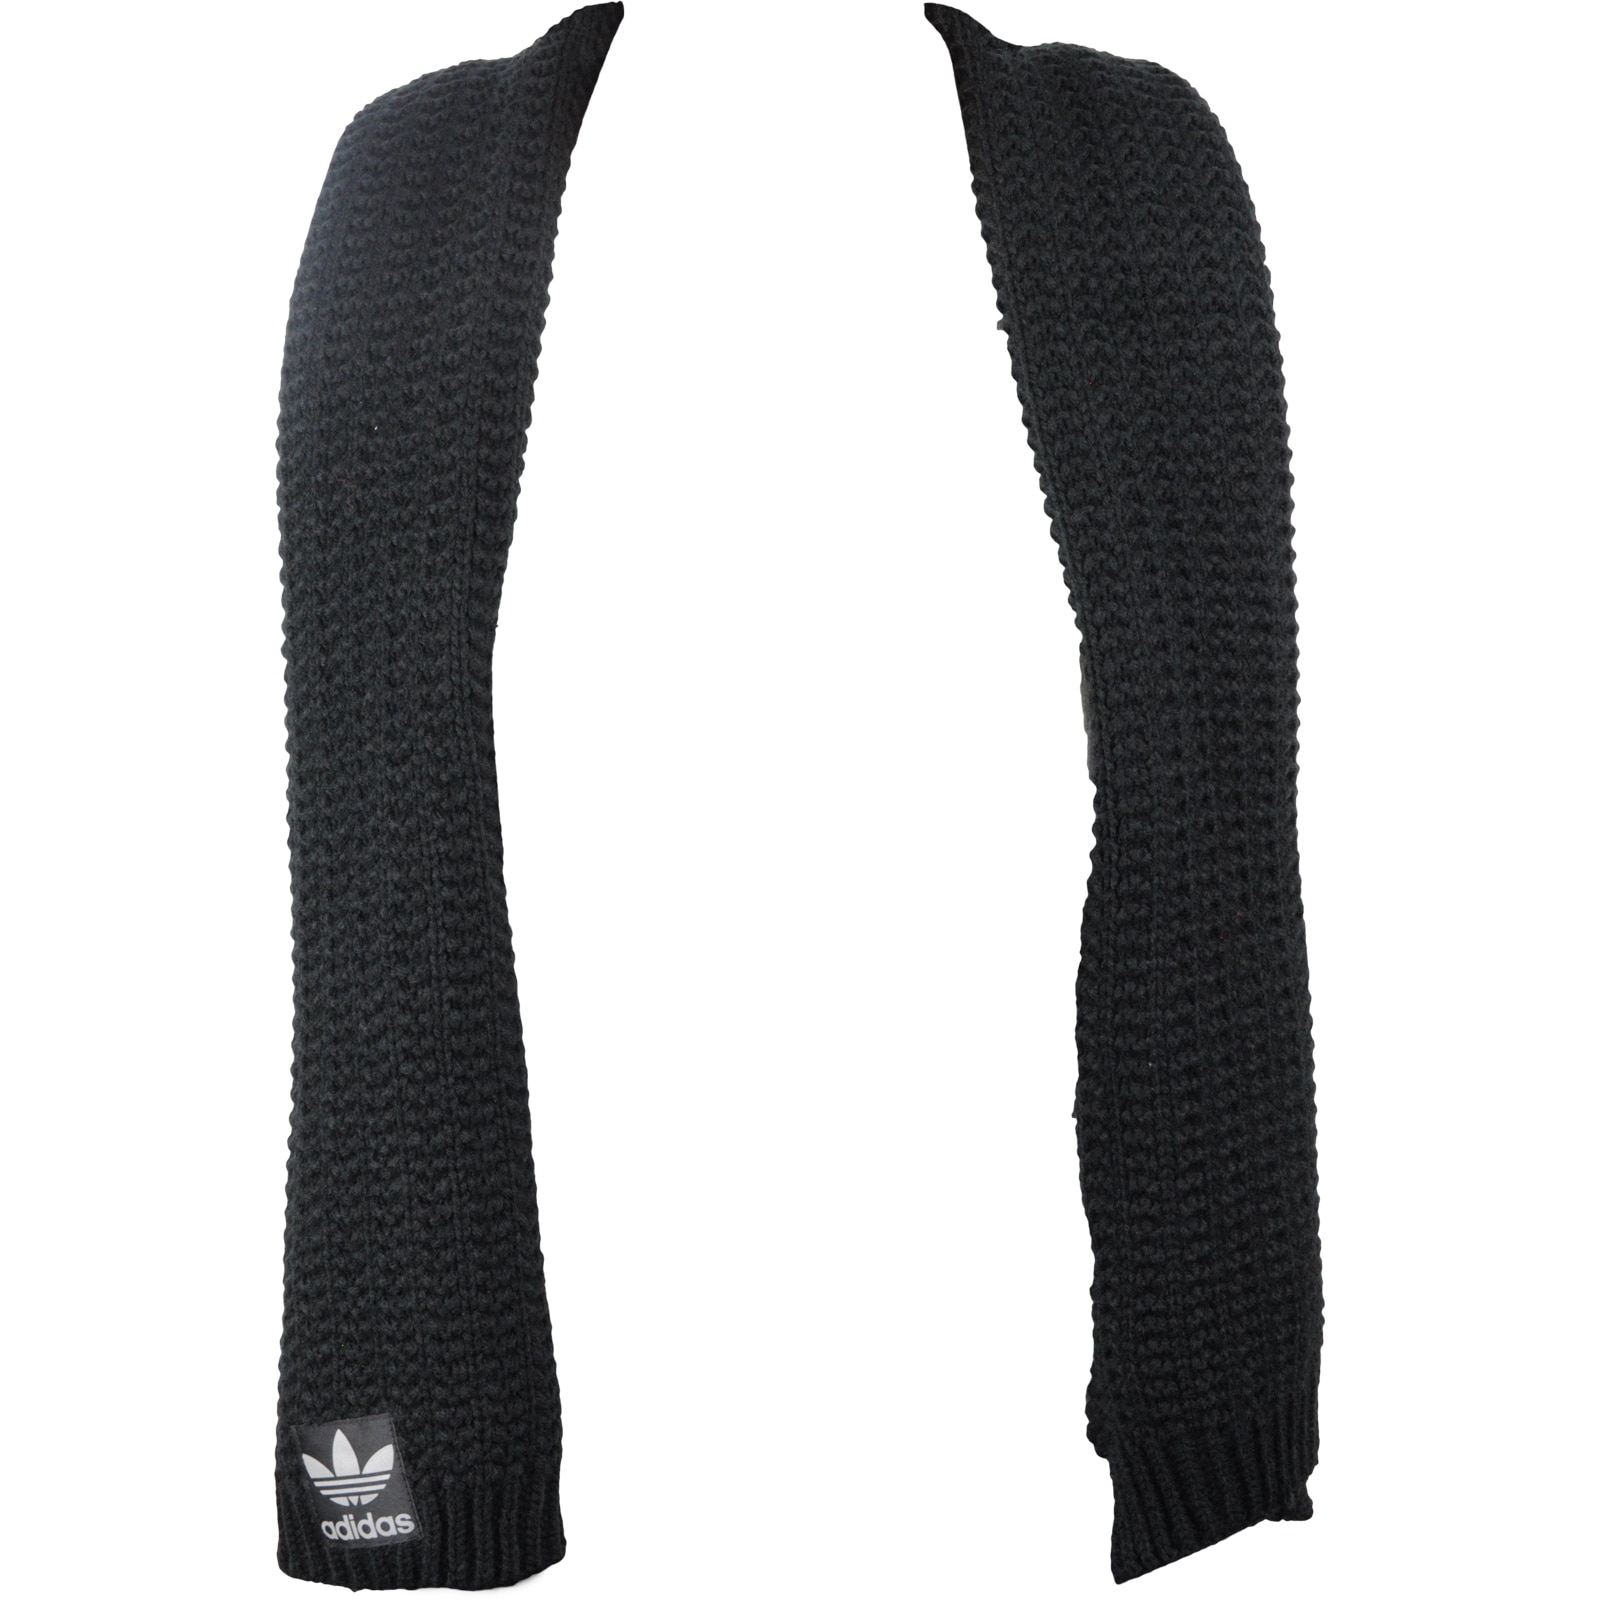 adidas scarf and gloves